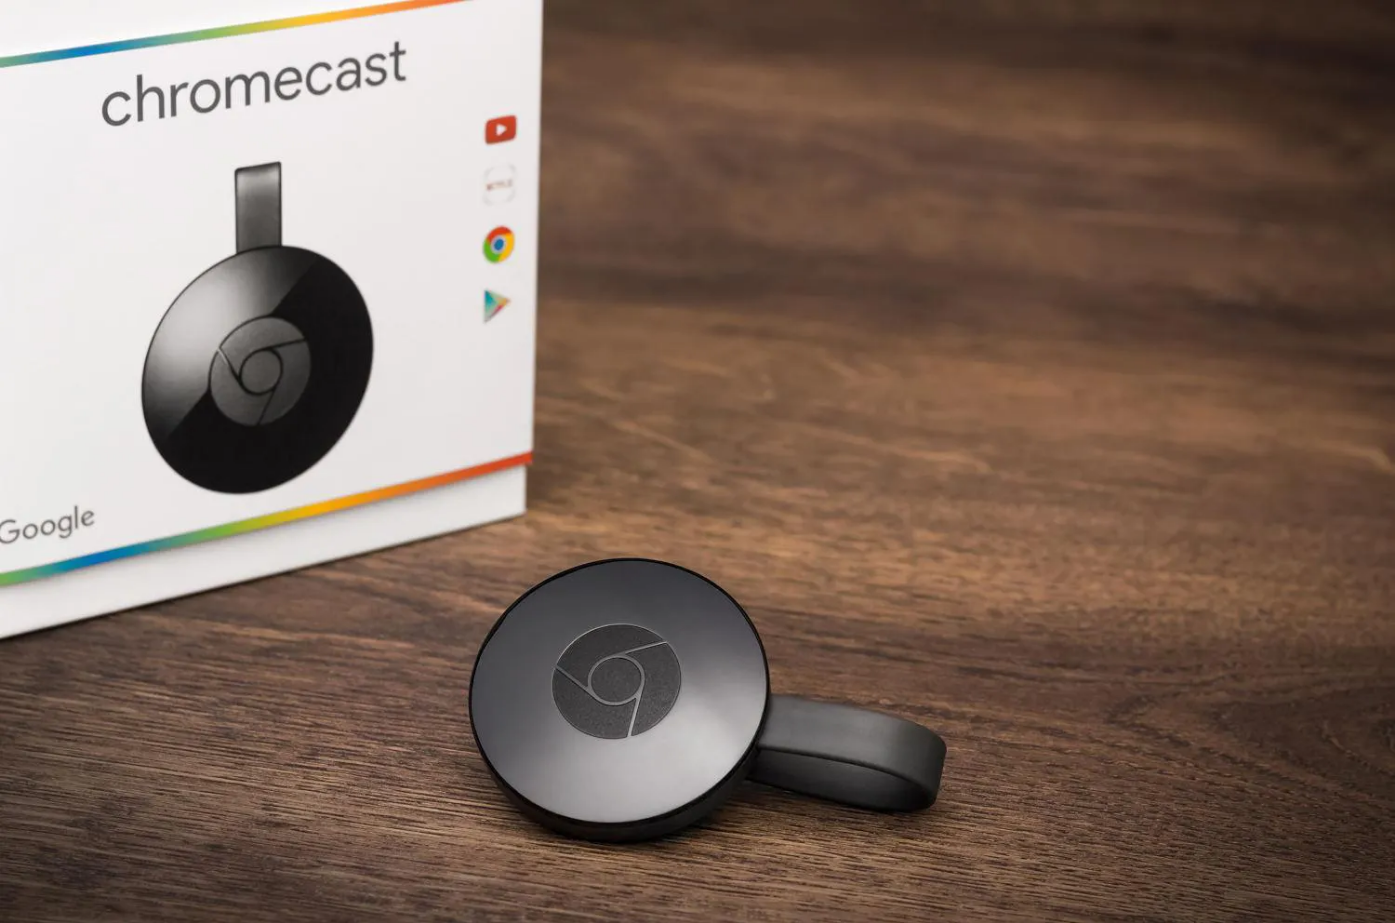 How to reset Chromecast in case it isn't working properly